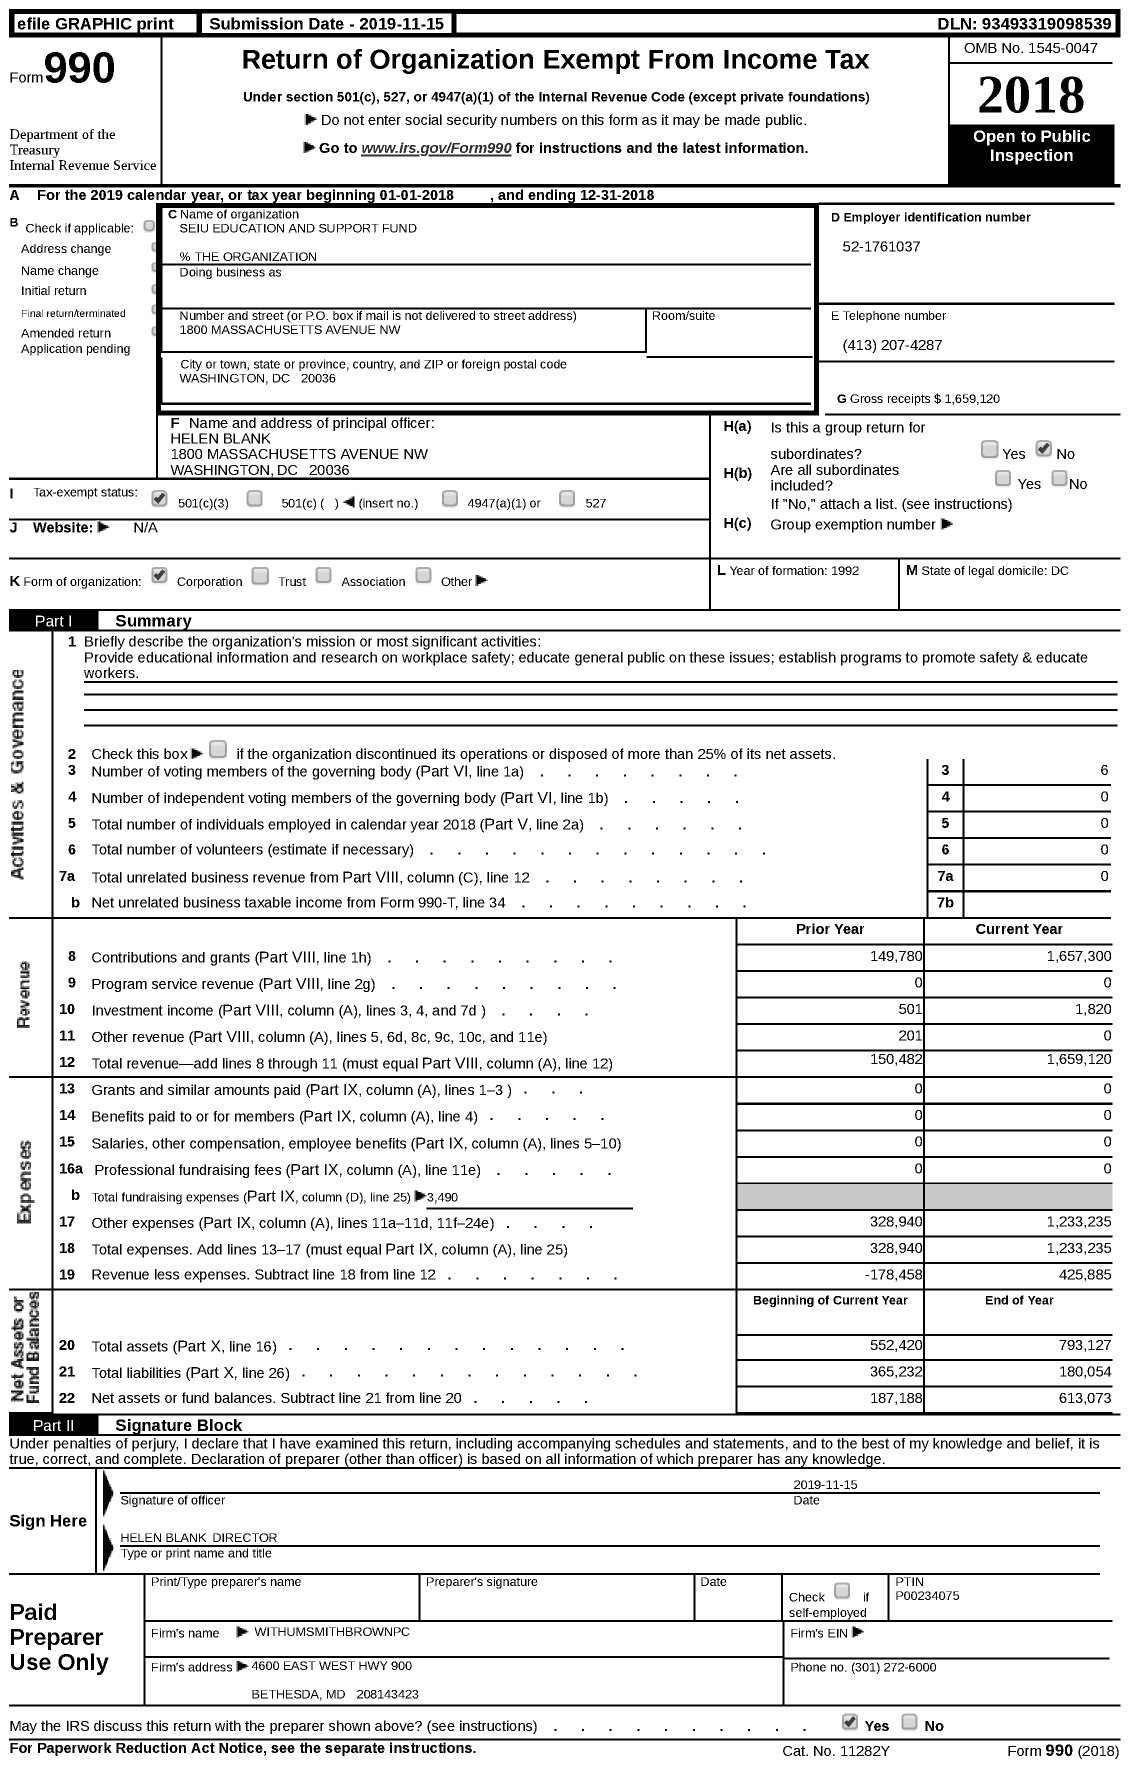 Image of first page of 2018 Form 990 for Seiu Education and Support Fund